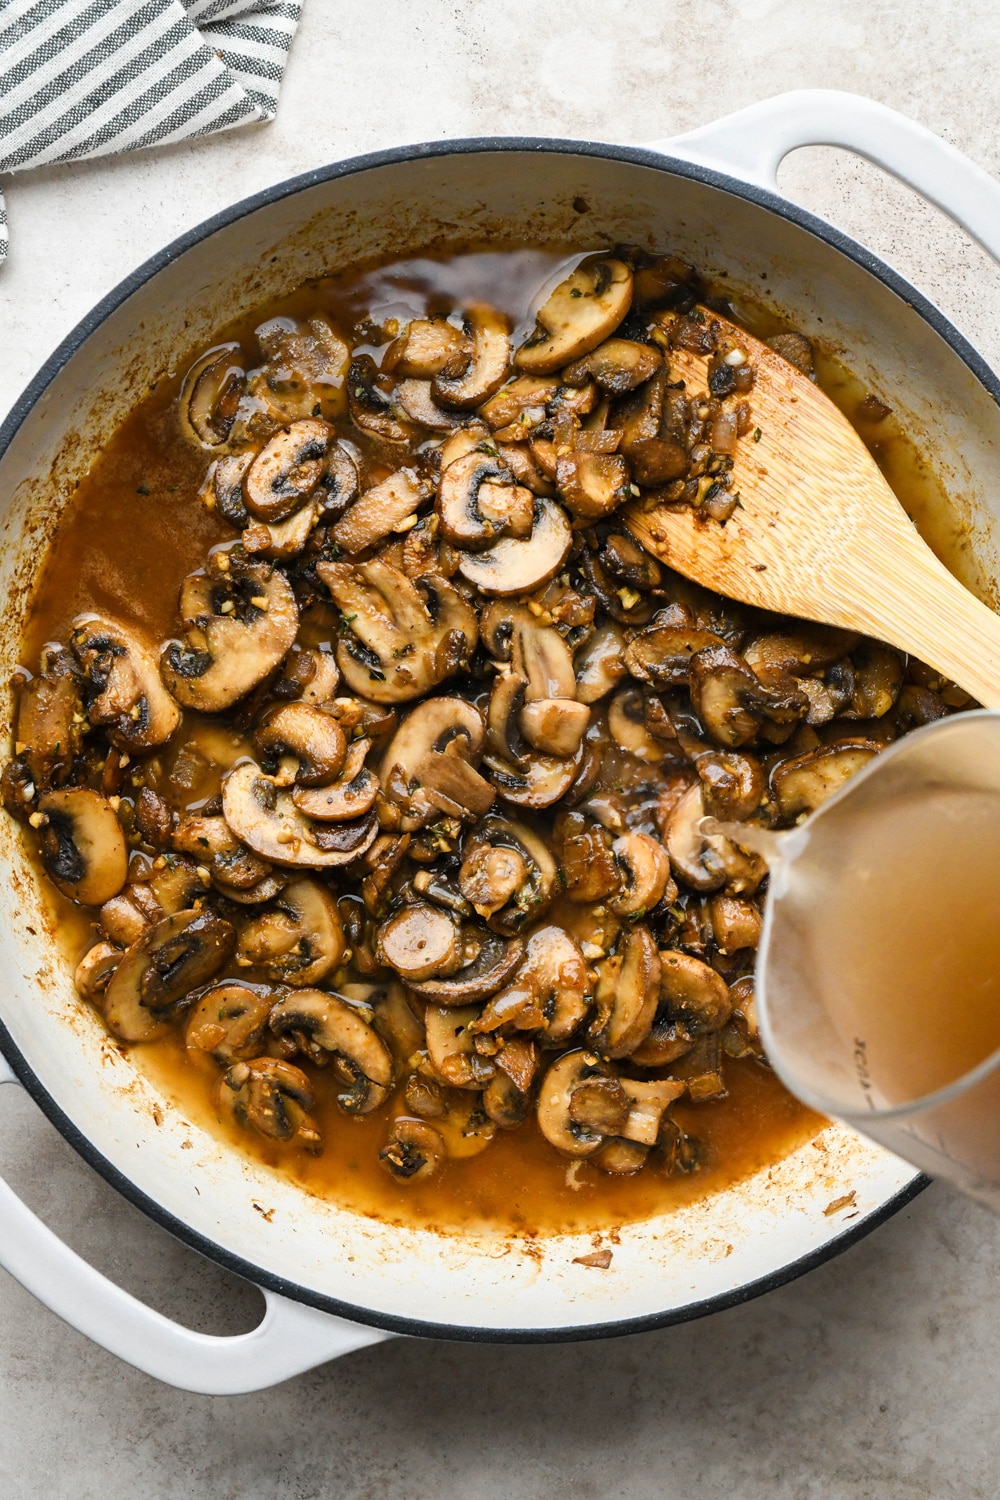 How to make Gluten Free Mushroom Gravy: Pouring mushroom broth into skillet with cooked mushrooms.